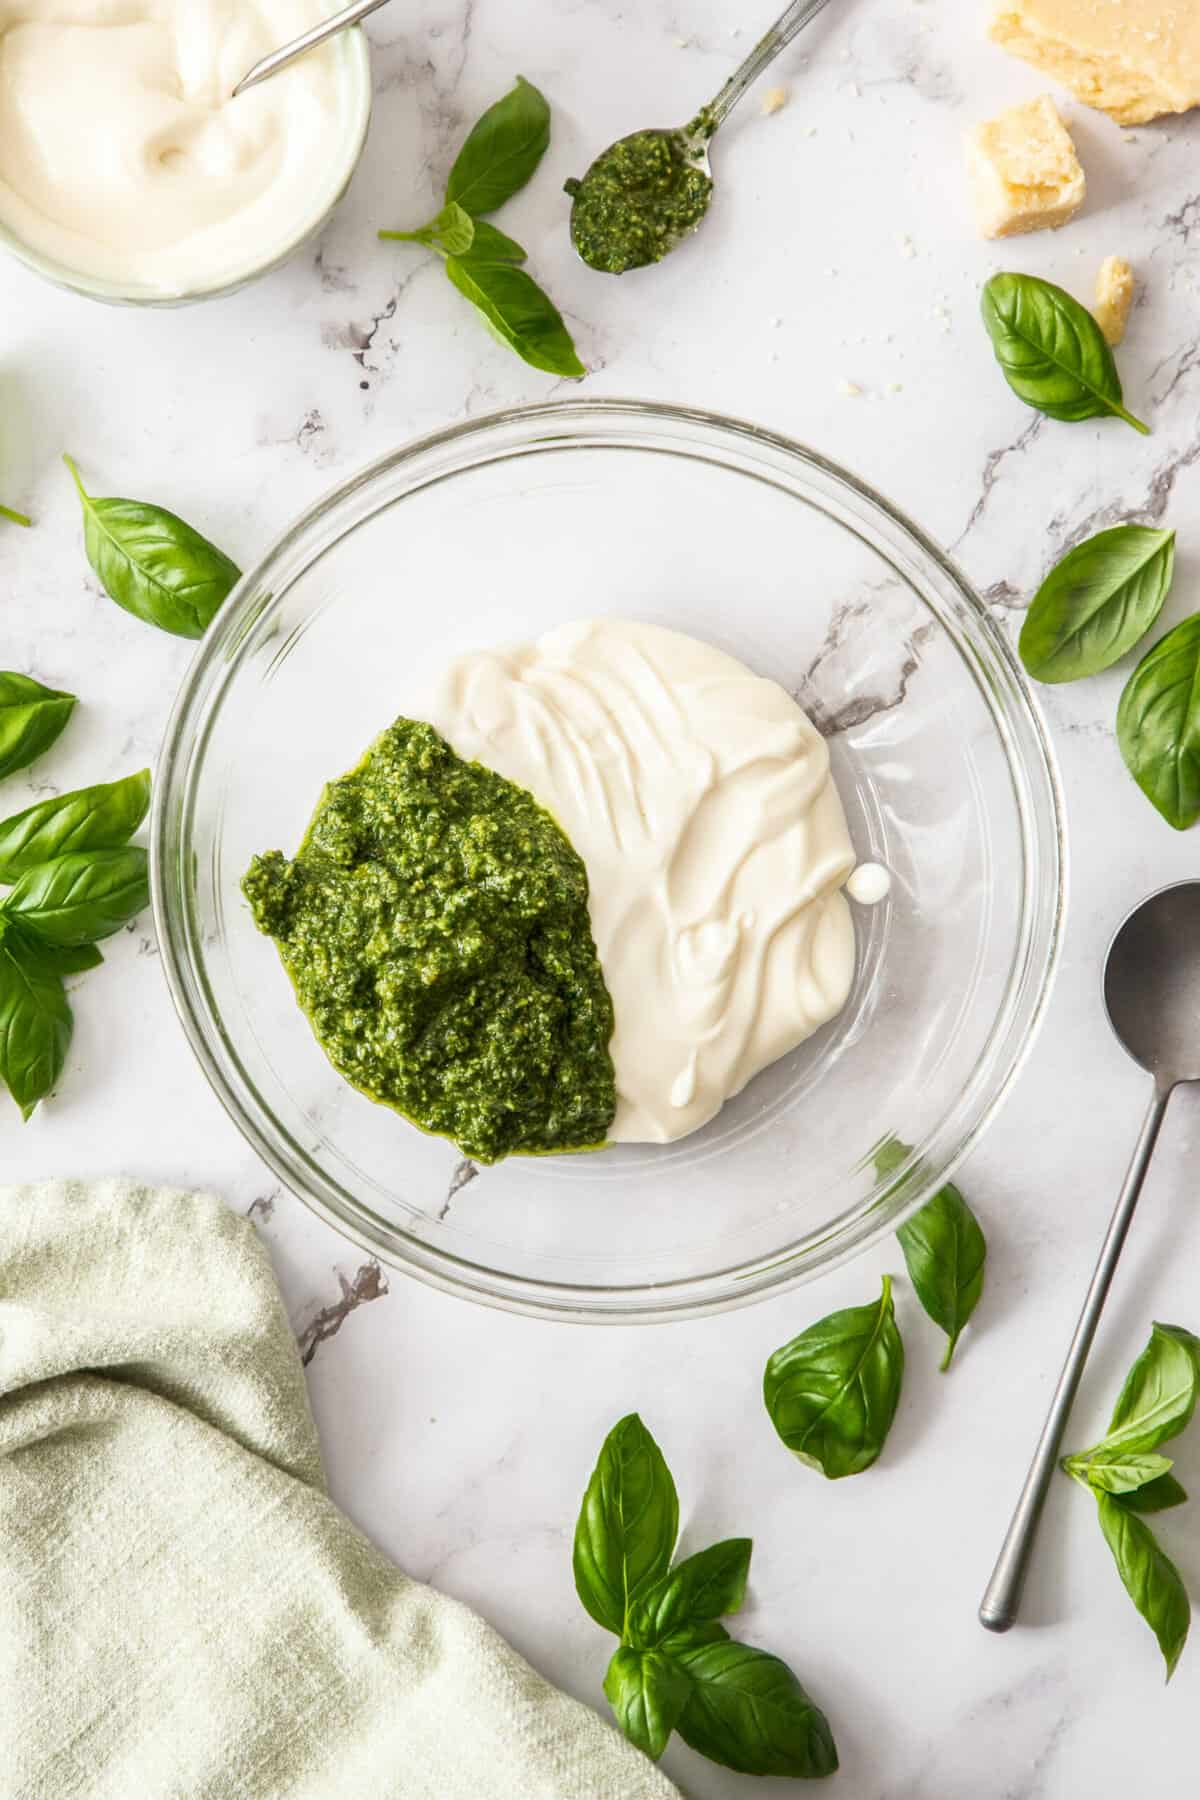 a glass bowl half filled with mayo and half filled with pesto.